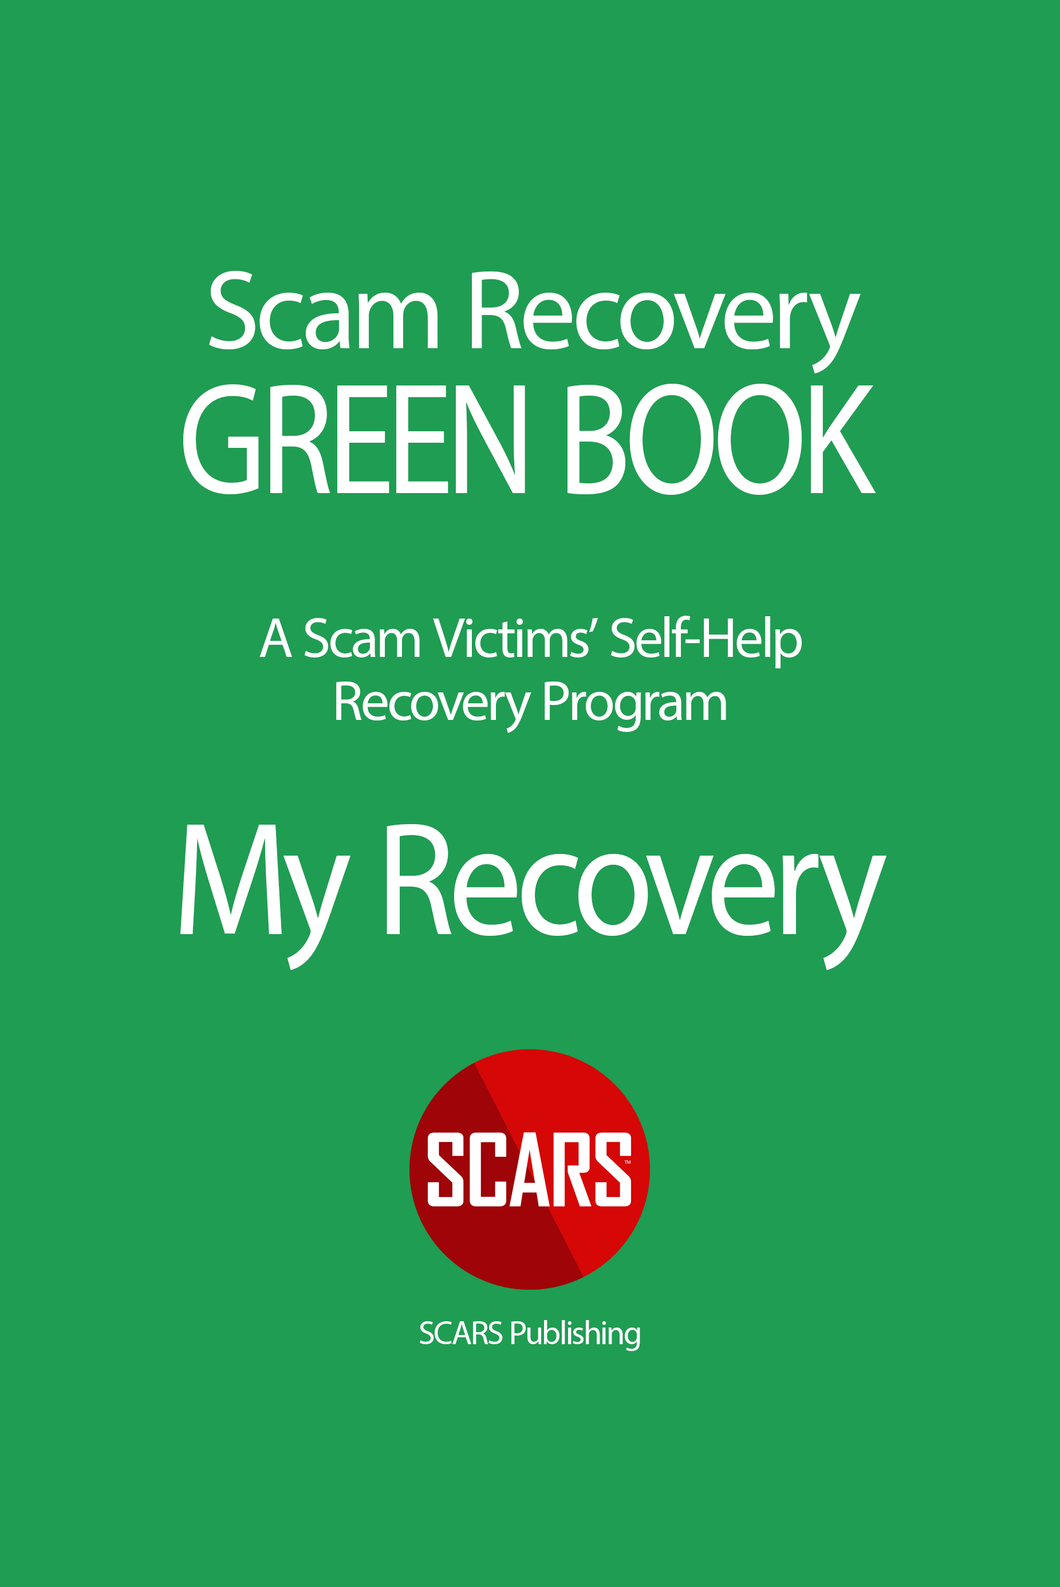 SCARS GREEN BOOK - The SCARS Self-Help Self-Paced Scam Victim Recovery Program Guide